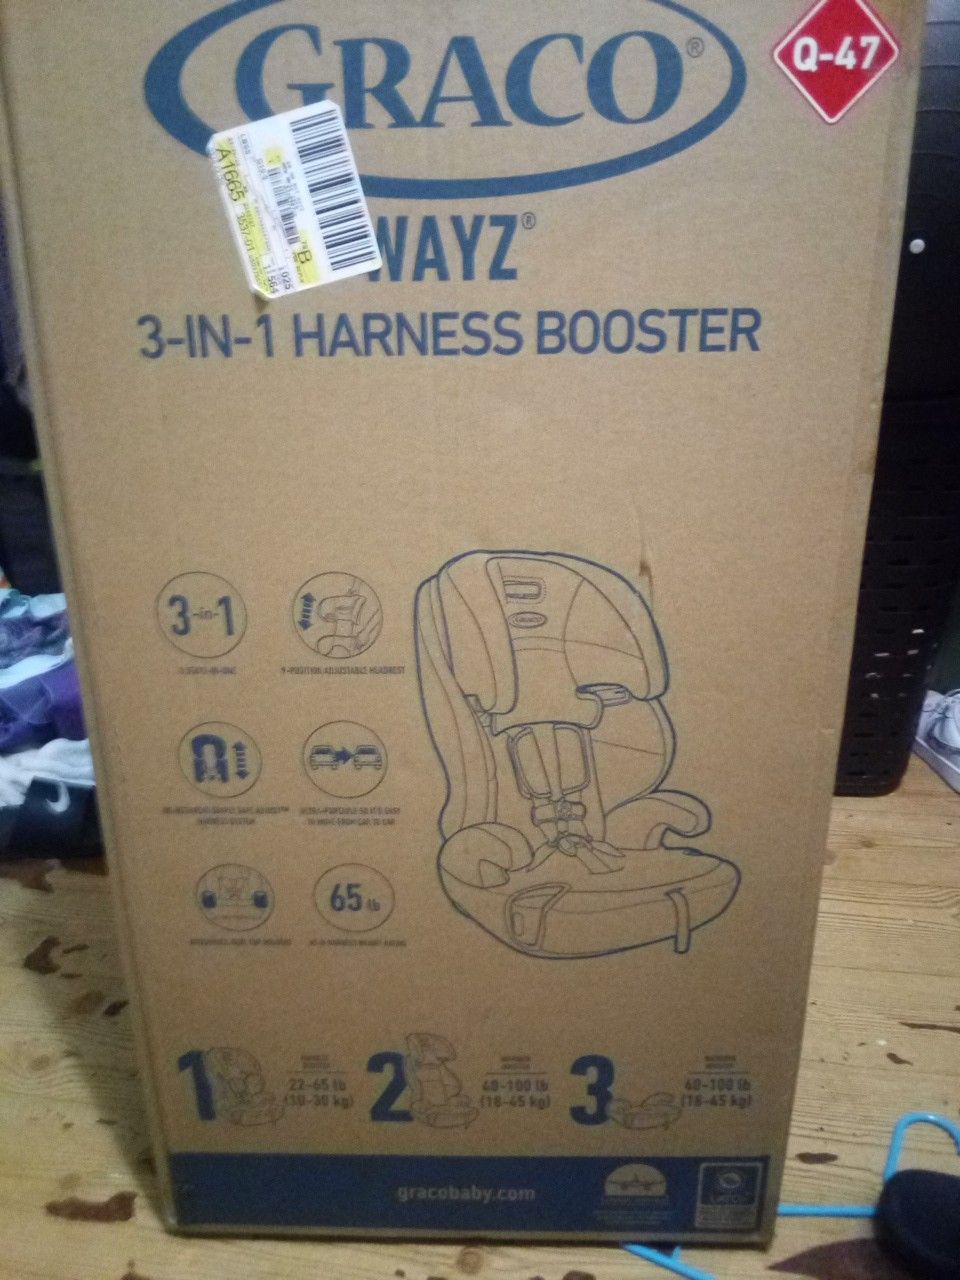 Graco 3 in 1 Harness Booster